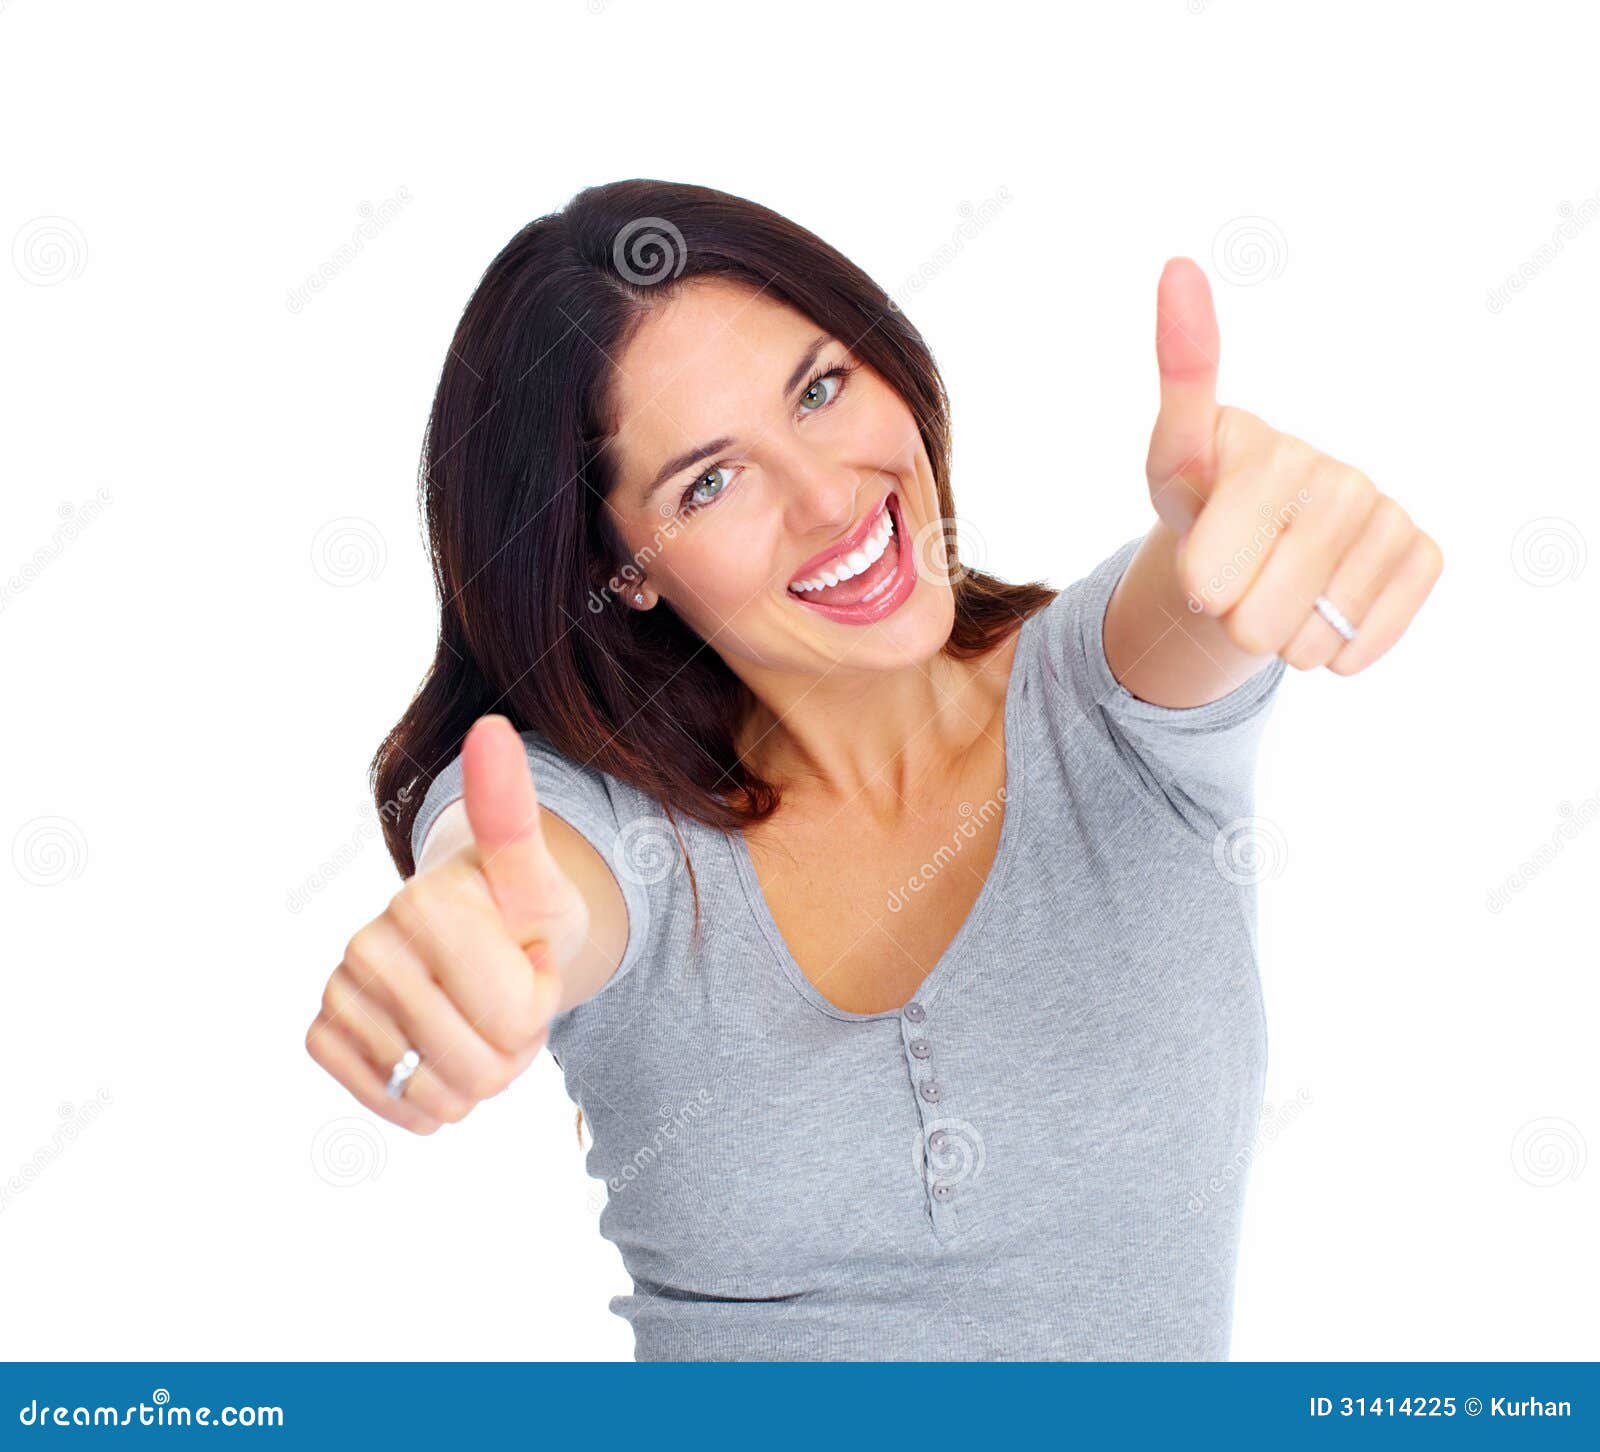 https://thumbs.dreamstime.com/z/young-happy-woman-portrait-success-isolated-over-white-background-31414225.jpg